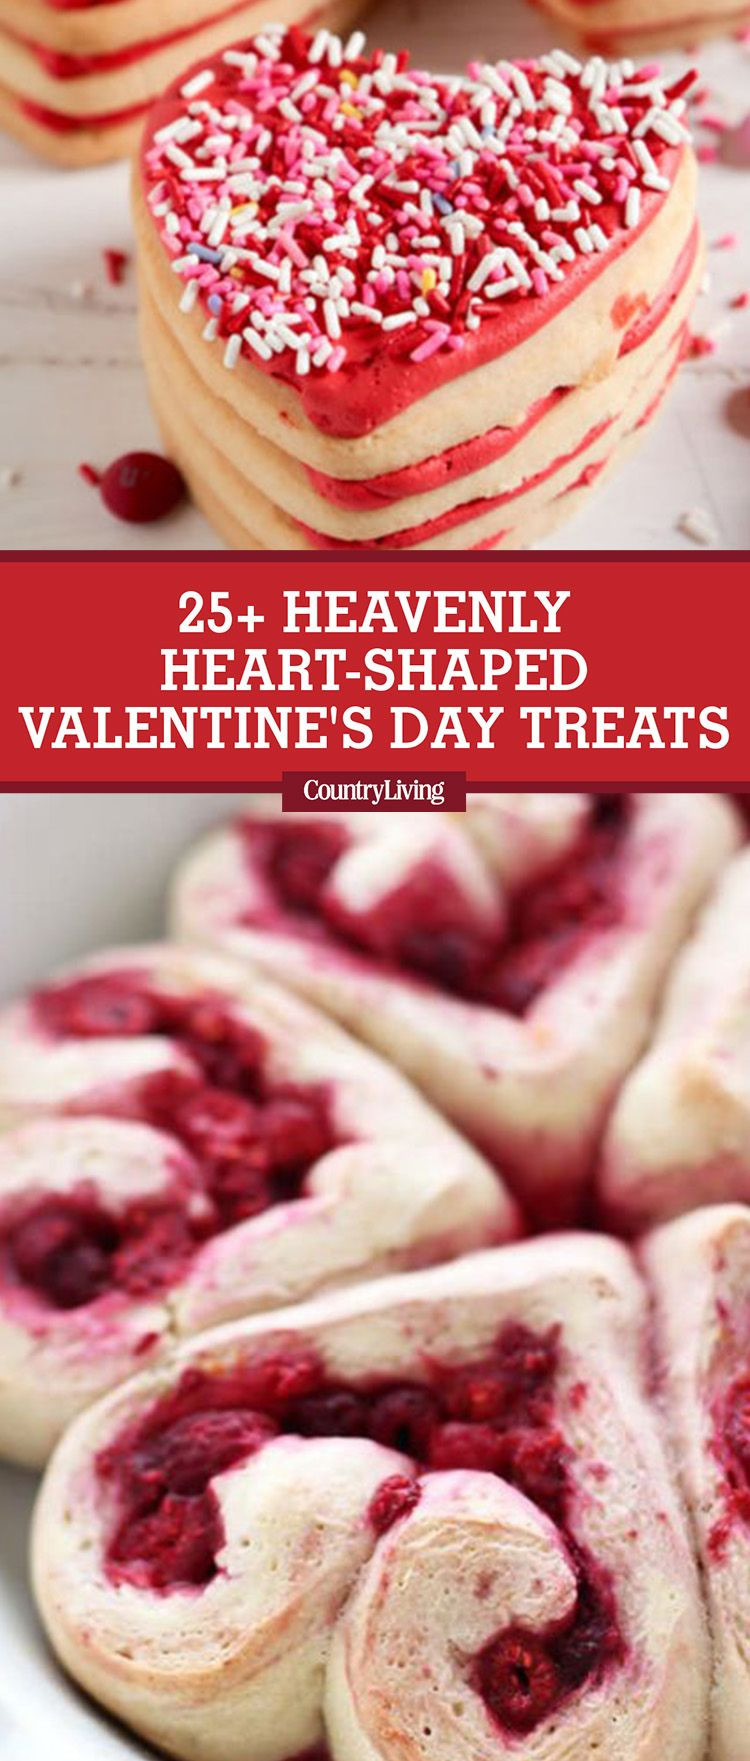 13 Cute Valentine Vase Fillers 2023 free download valentine vase fillers of 27 heavenly heart shaped valentines day recipes valentines day with regard to these desserts will steal your heart on valentines day valentinesday valentinesdaydess